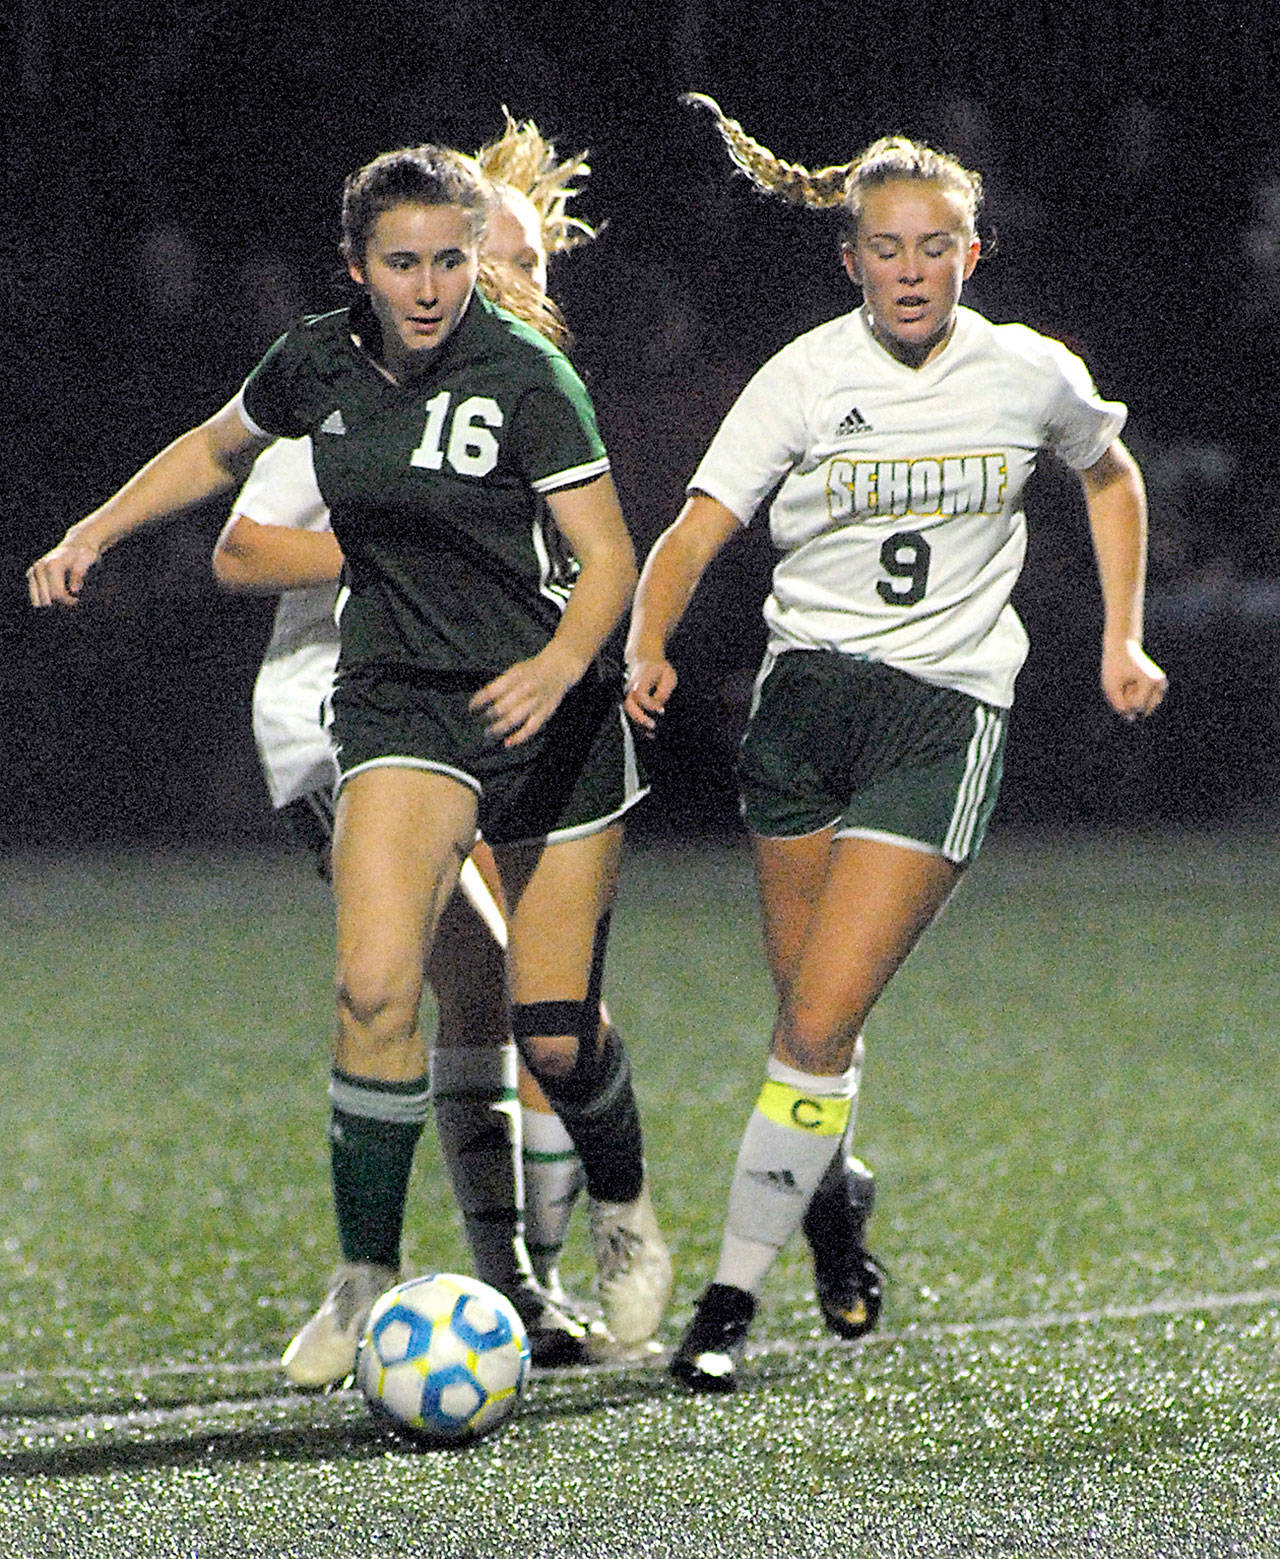 Port Angeles’ Delaney Wenzel outruns Sehome’s Lillian Gruman during the playoffs in November 2019 at Peninsula College’s Wally Sigmar Field. (Keith Thorpe/Peninsula Daily News)